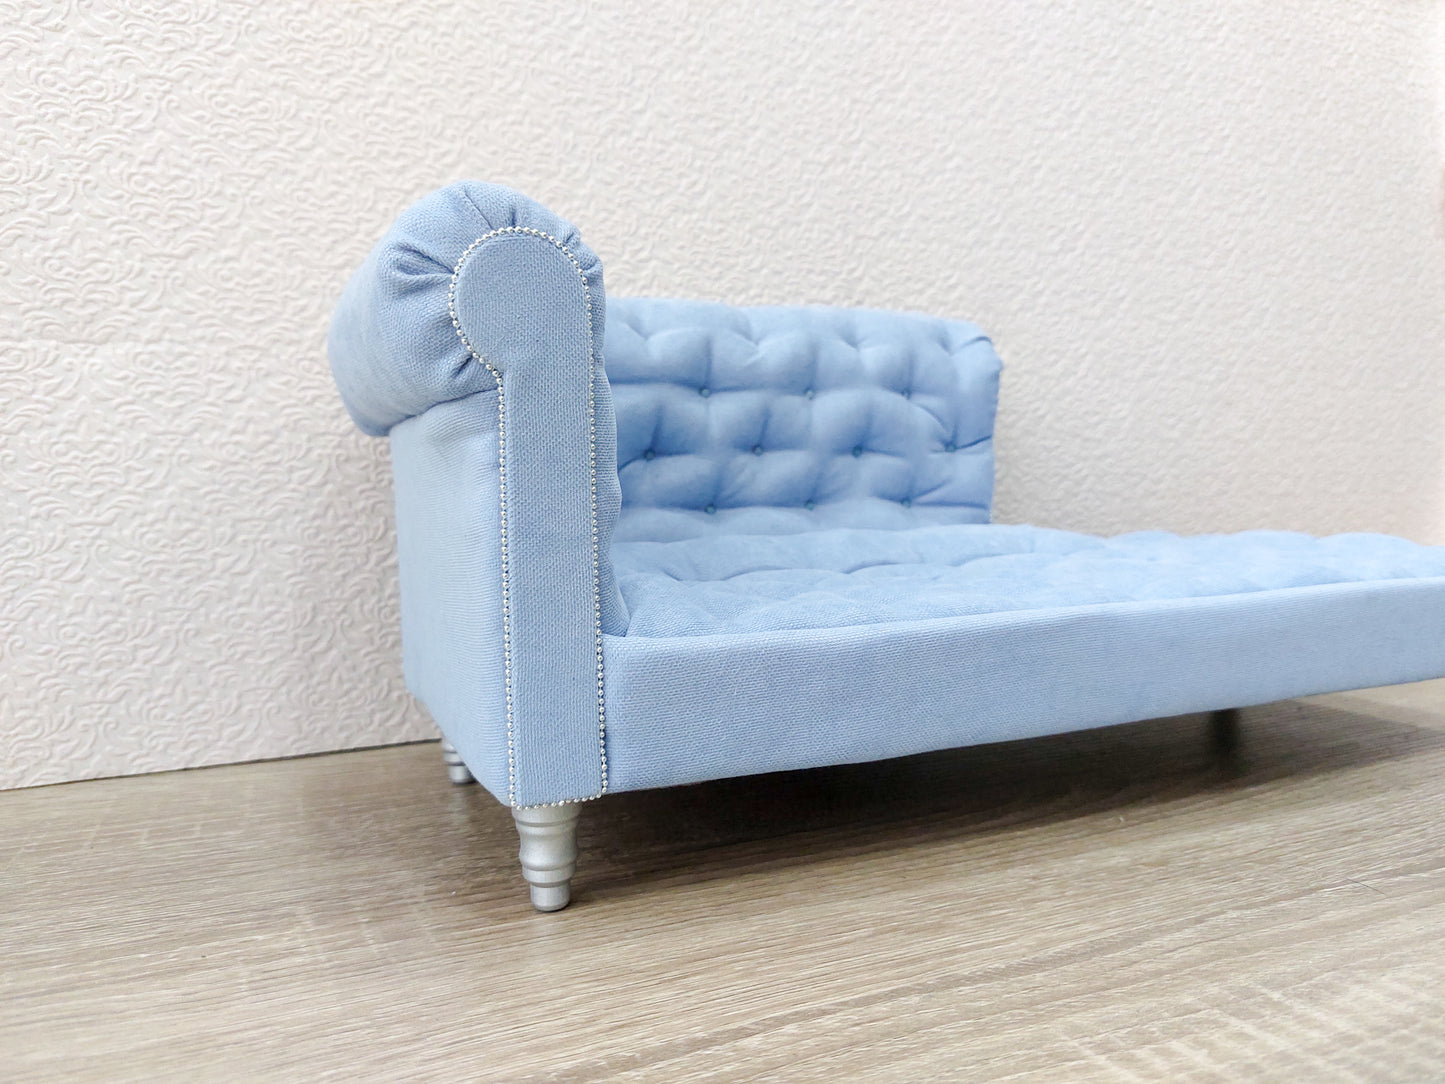 Chesterfield chaise lounge, blue